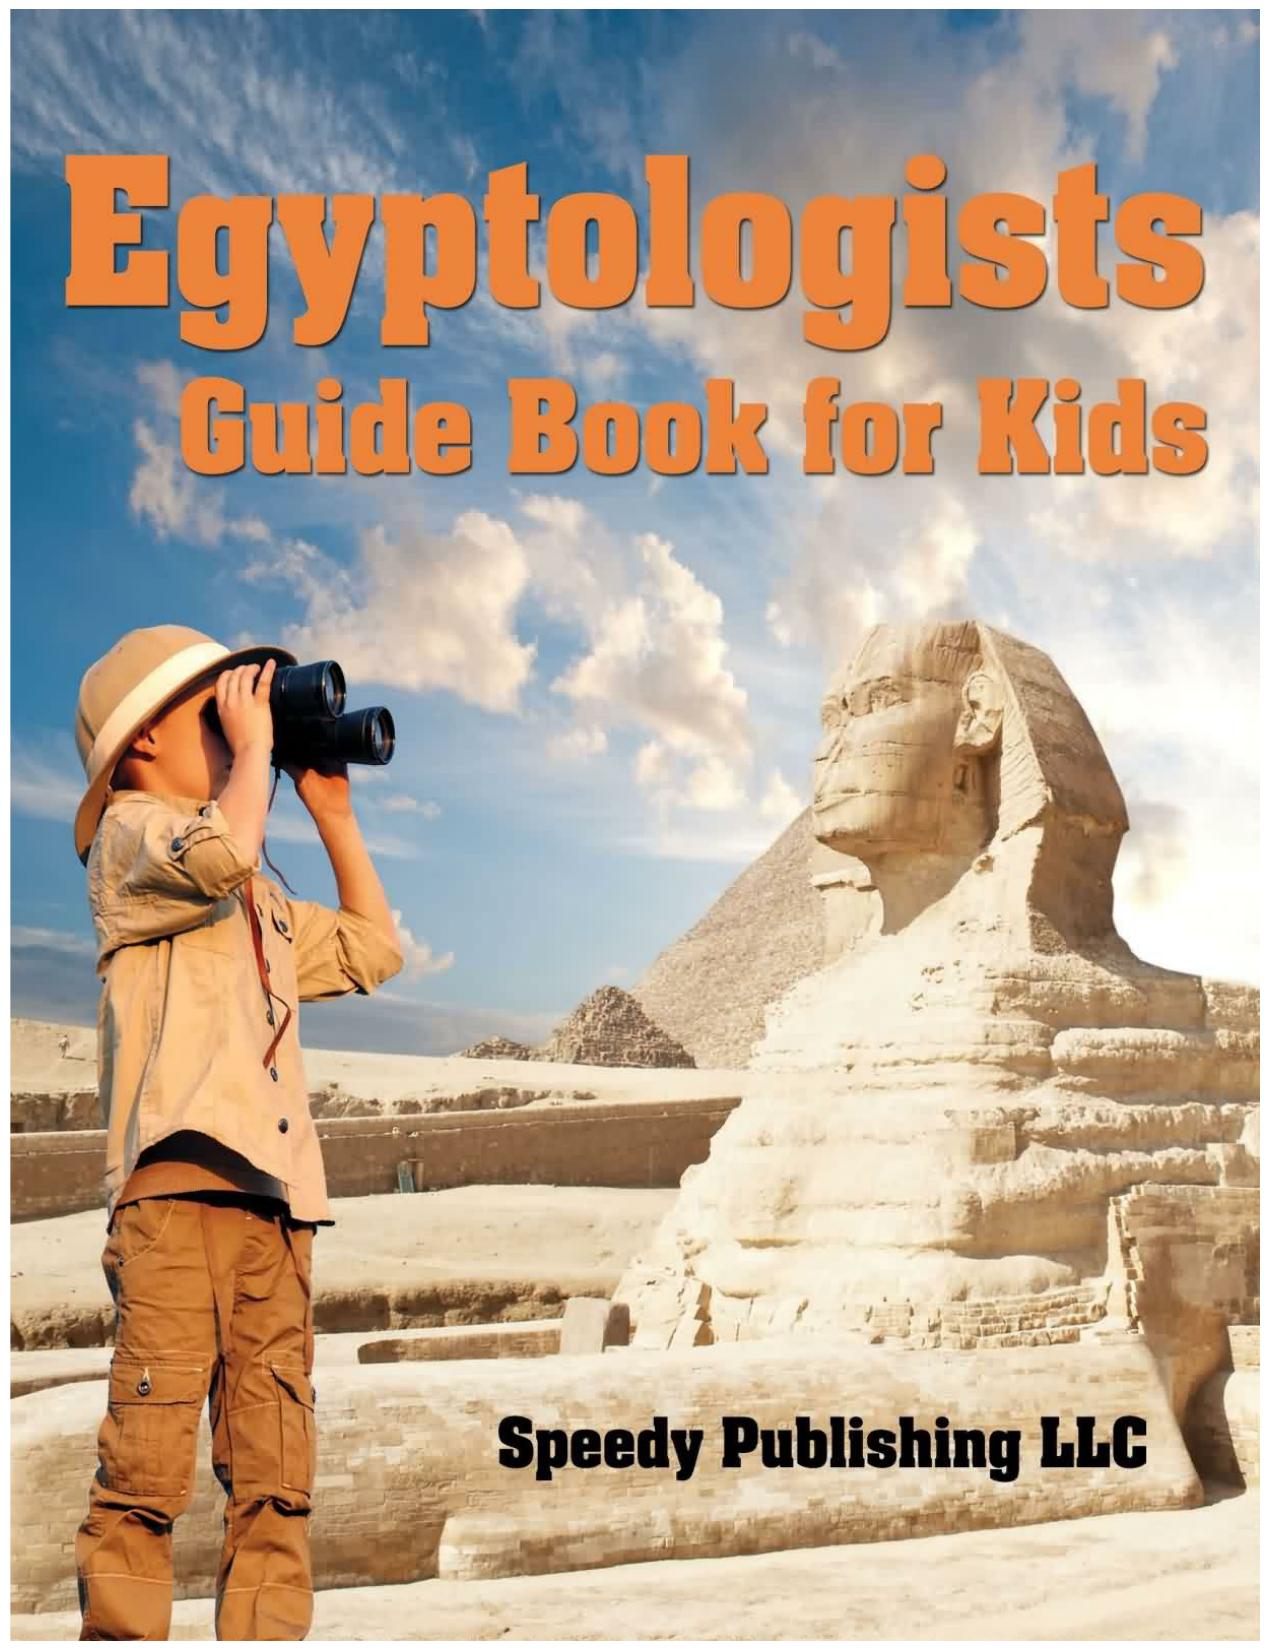 Egyptologists Guide Book For Kids by Speedy Publishing